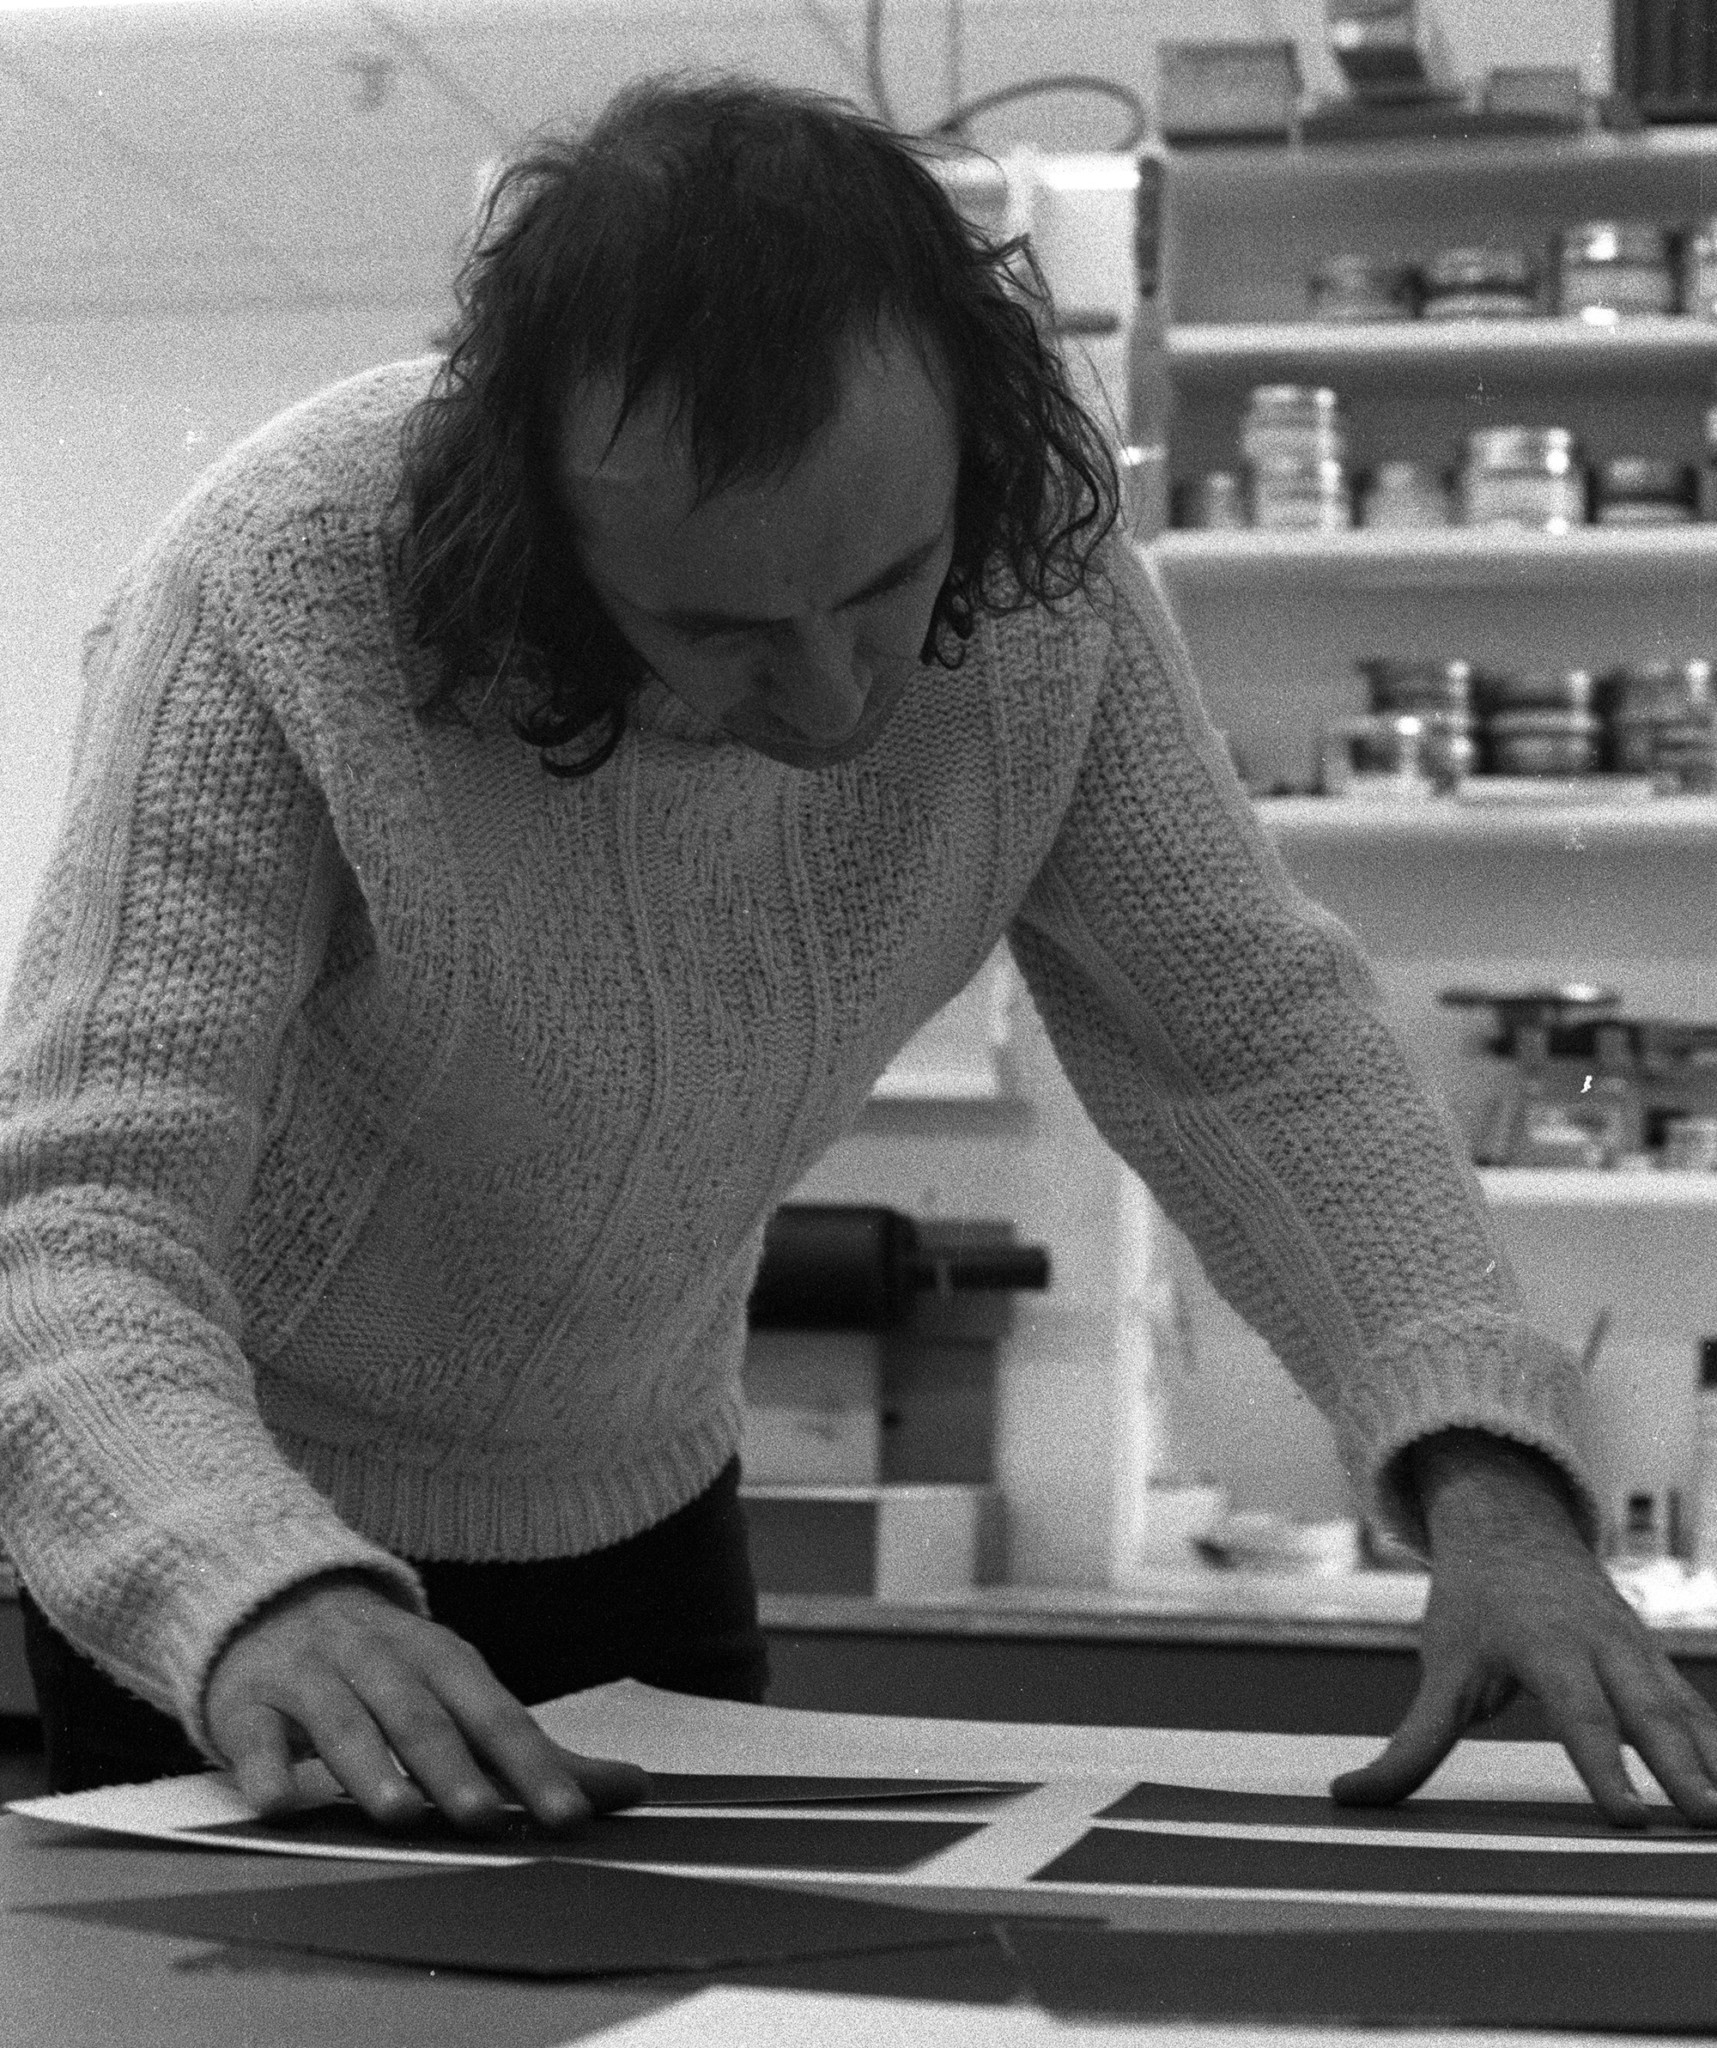 Black and white photo of artist Vito Acconci, with shoulder length hair wearing a cable knit sweater adjusting prints in the print studio. A shelf of inks and chemicals is behind him.